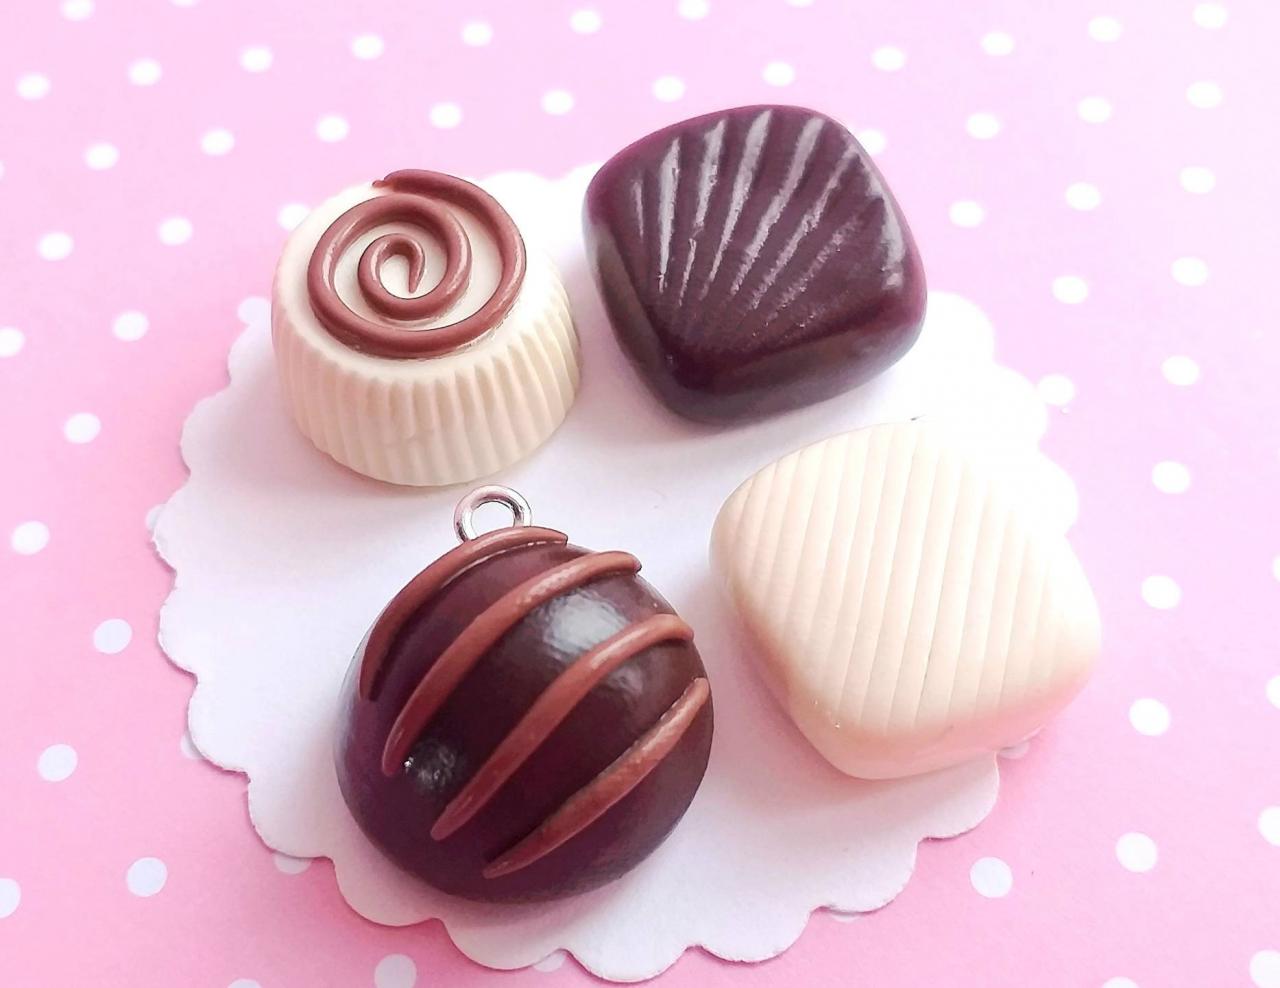 4 Mixed Chocolate Truffles Charms - Kawaii Charms - Polymer Clay Charms - Food Jewelry - Gift - Necklace Pendant - Food Keychain